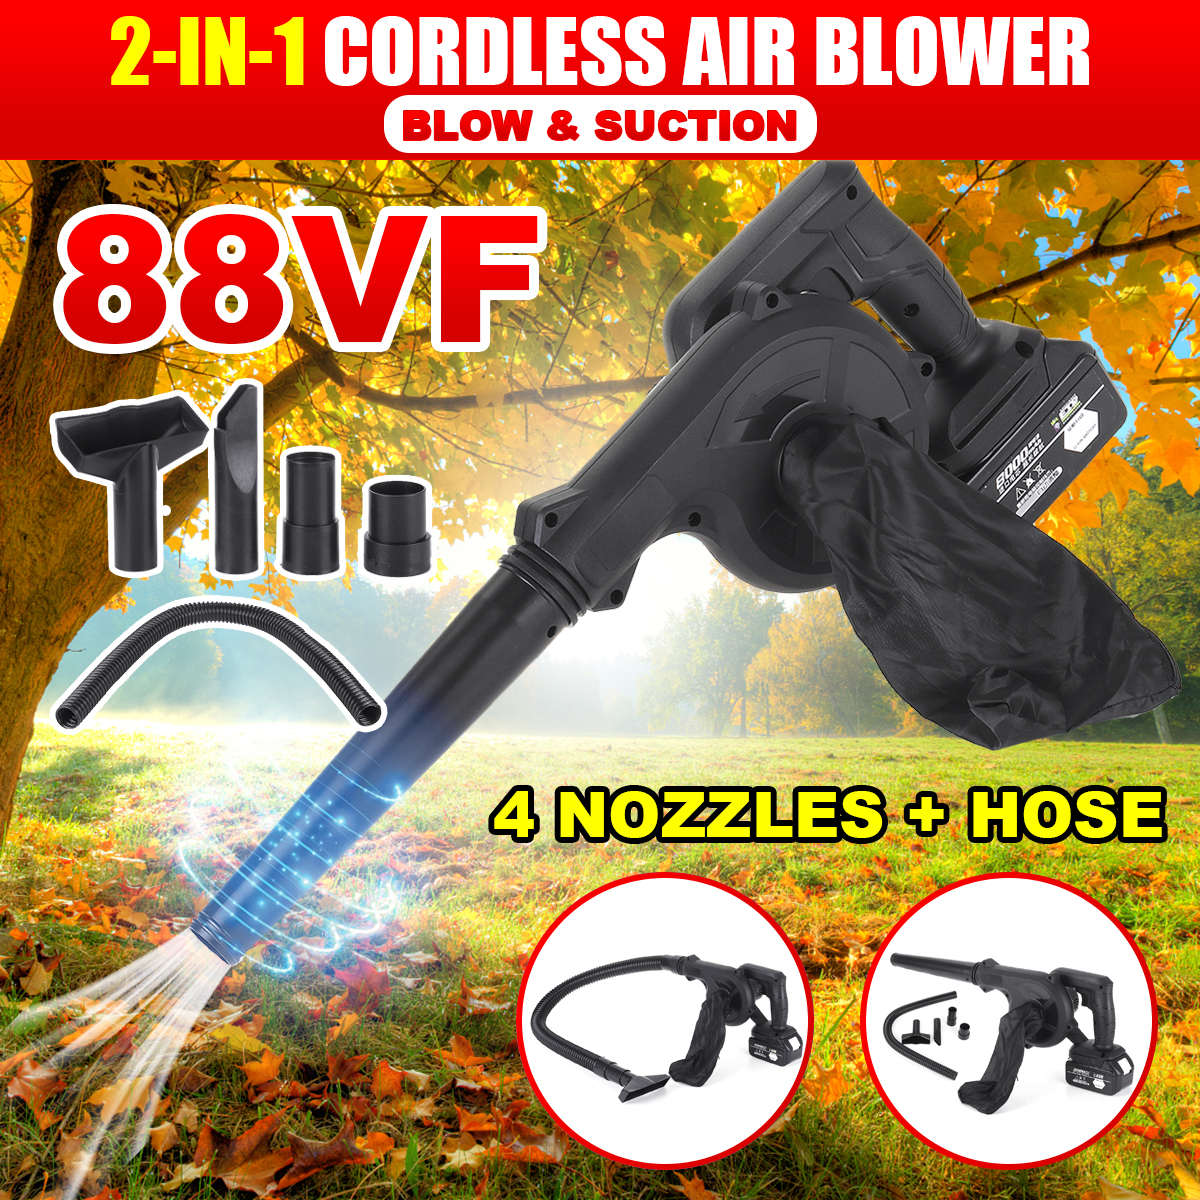 2-in-1-Cordless-Electric-Air-Blower-Garden-Leaf-Dust-Car-Cleaner-Tool-W-None12pcs-Battery-Also-for-M-1843007-1